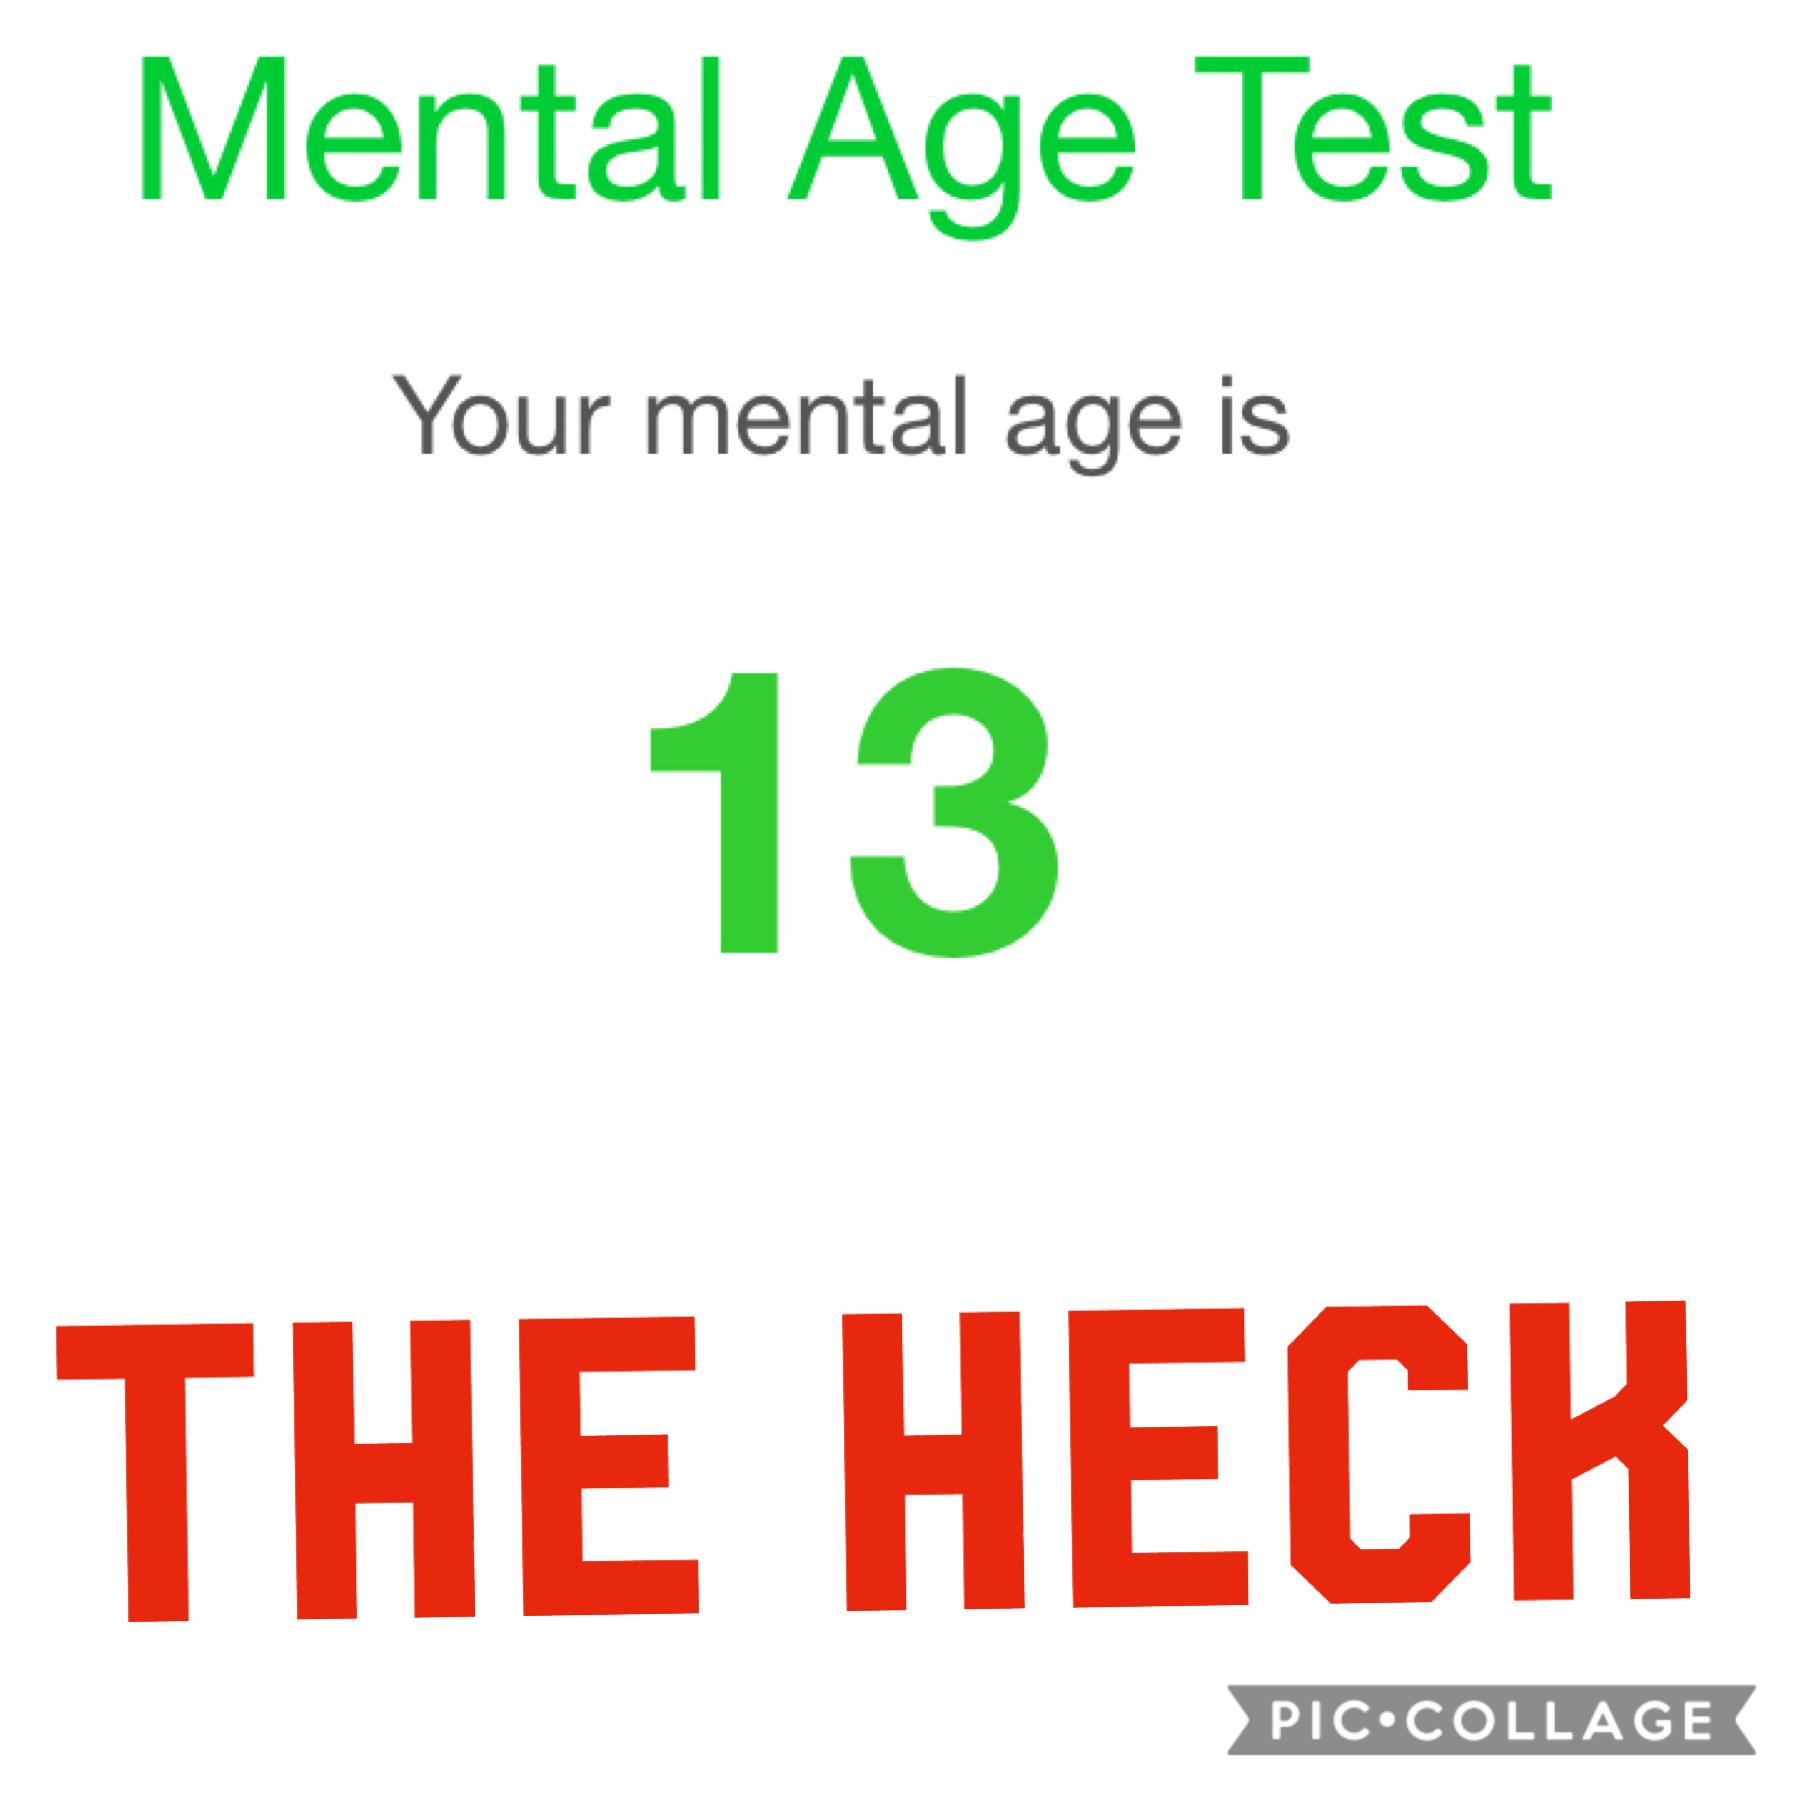 My mental age is 13 THE HECK